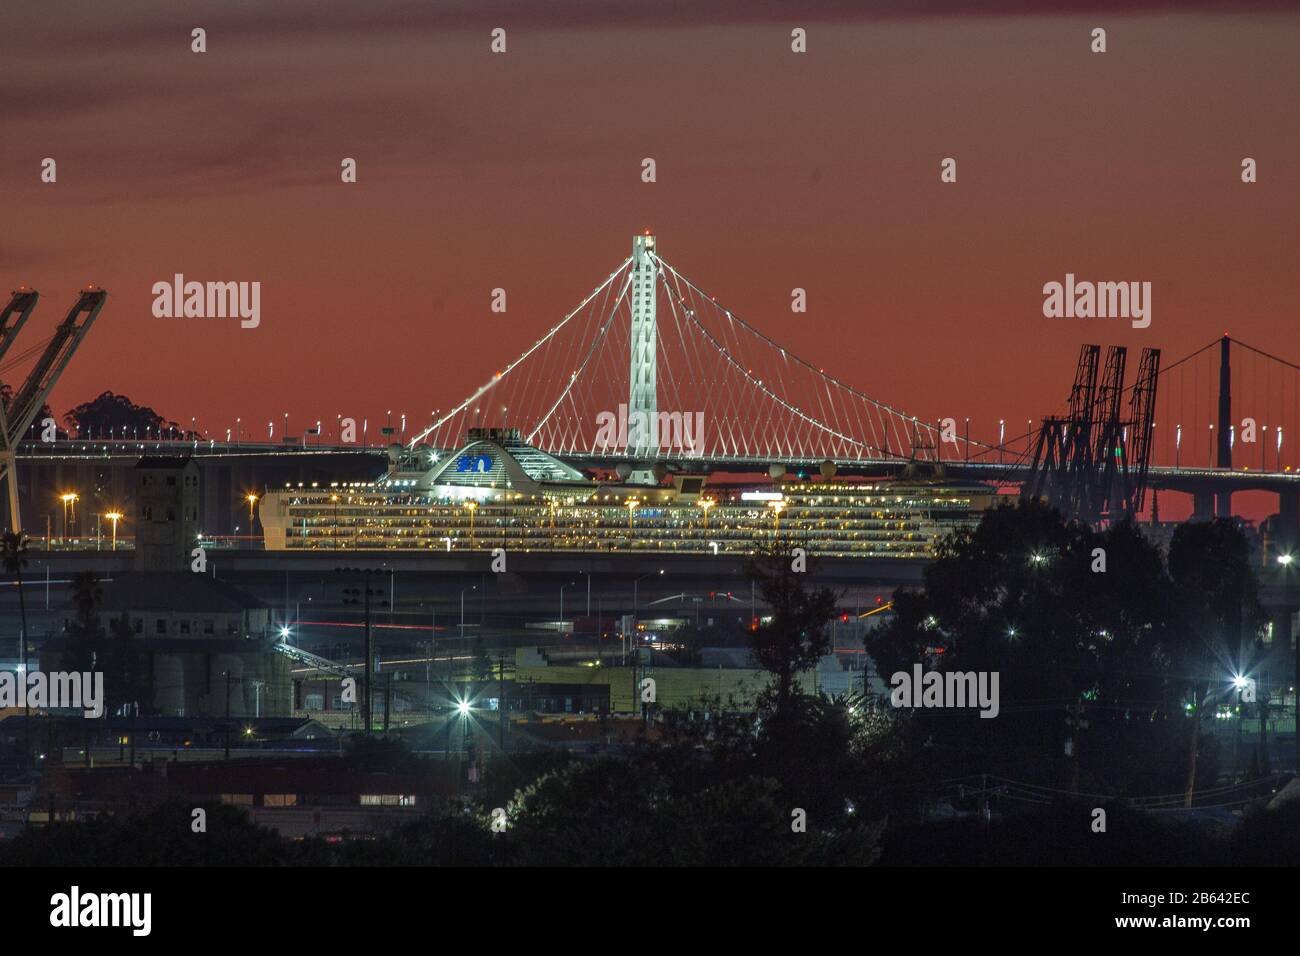 The Grand Princess cruise, carrying at least 21 people infected with the Caronavirus docked at the Port of Oakland on the evening after its arrival. Stock Photo